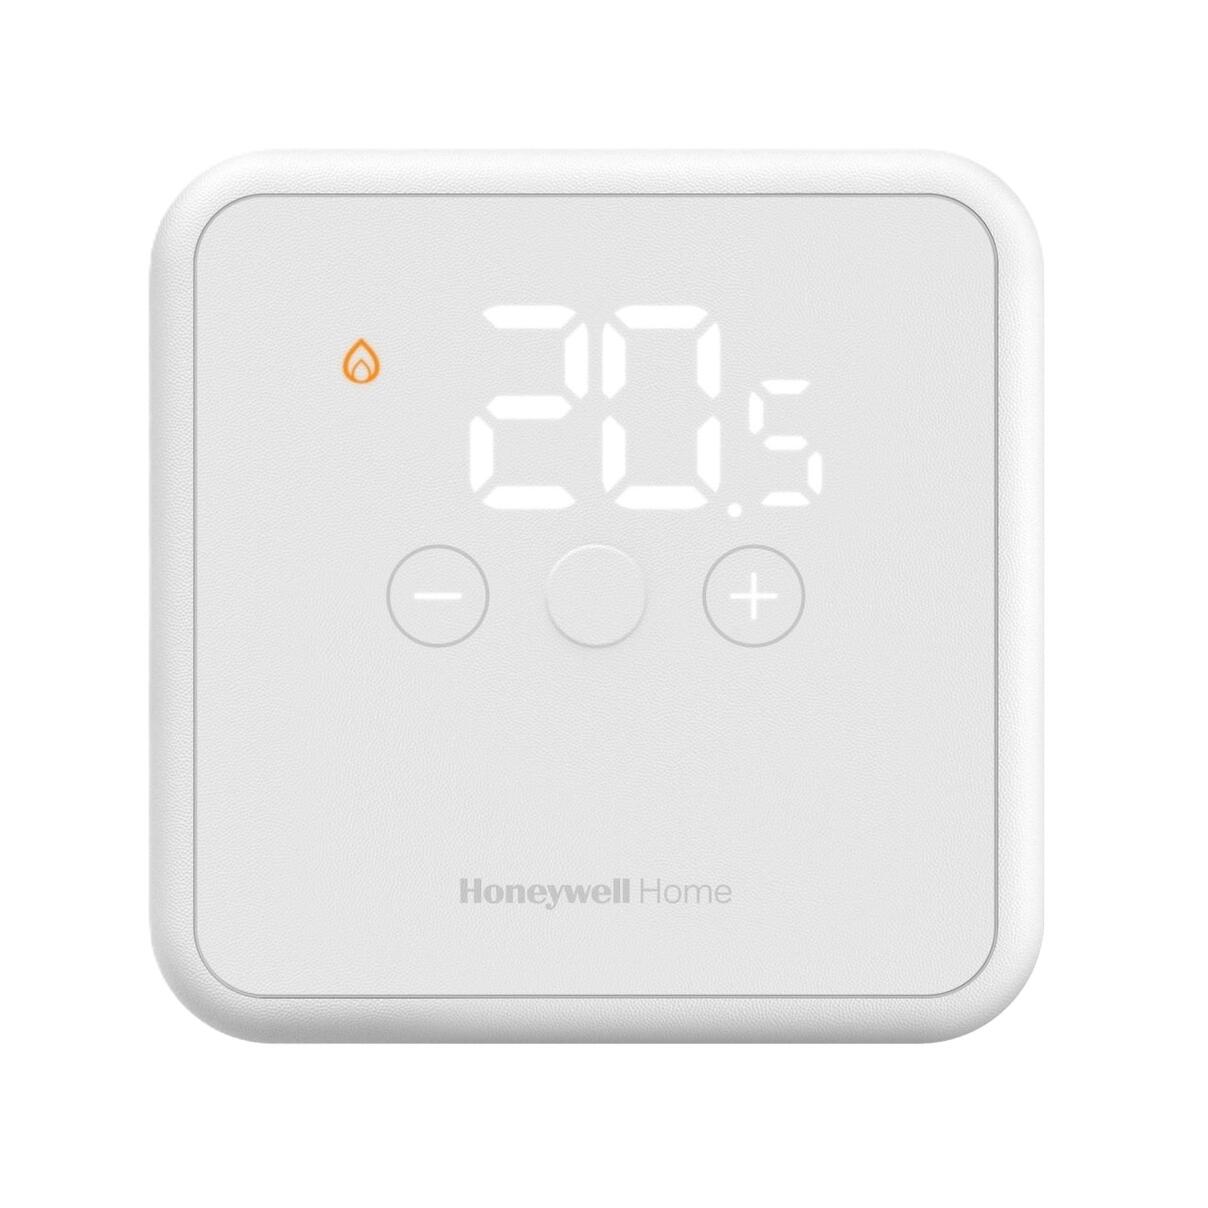 THERMOSTAT D'AMBIANCE - Thermostat d'ambiance DT4R